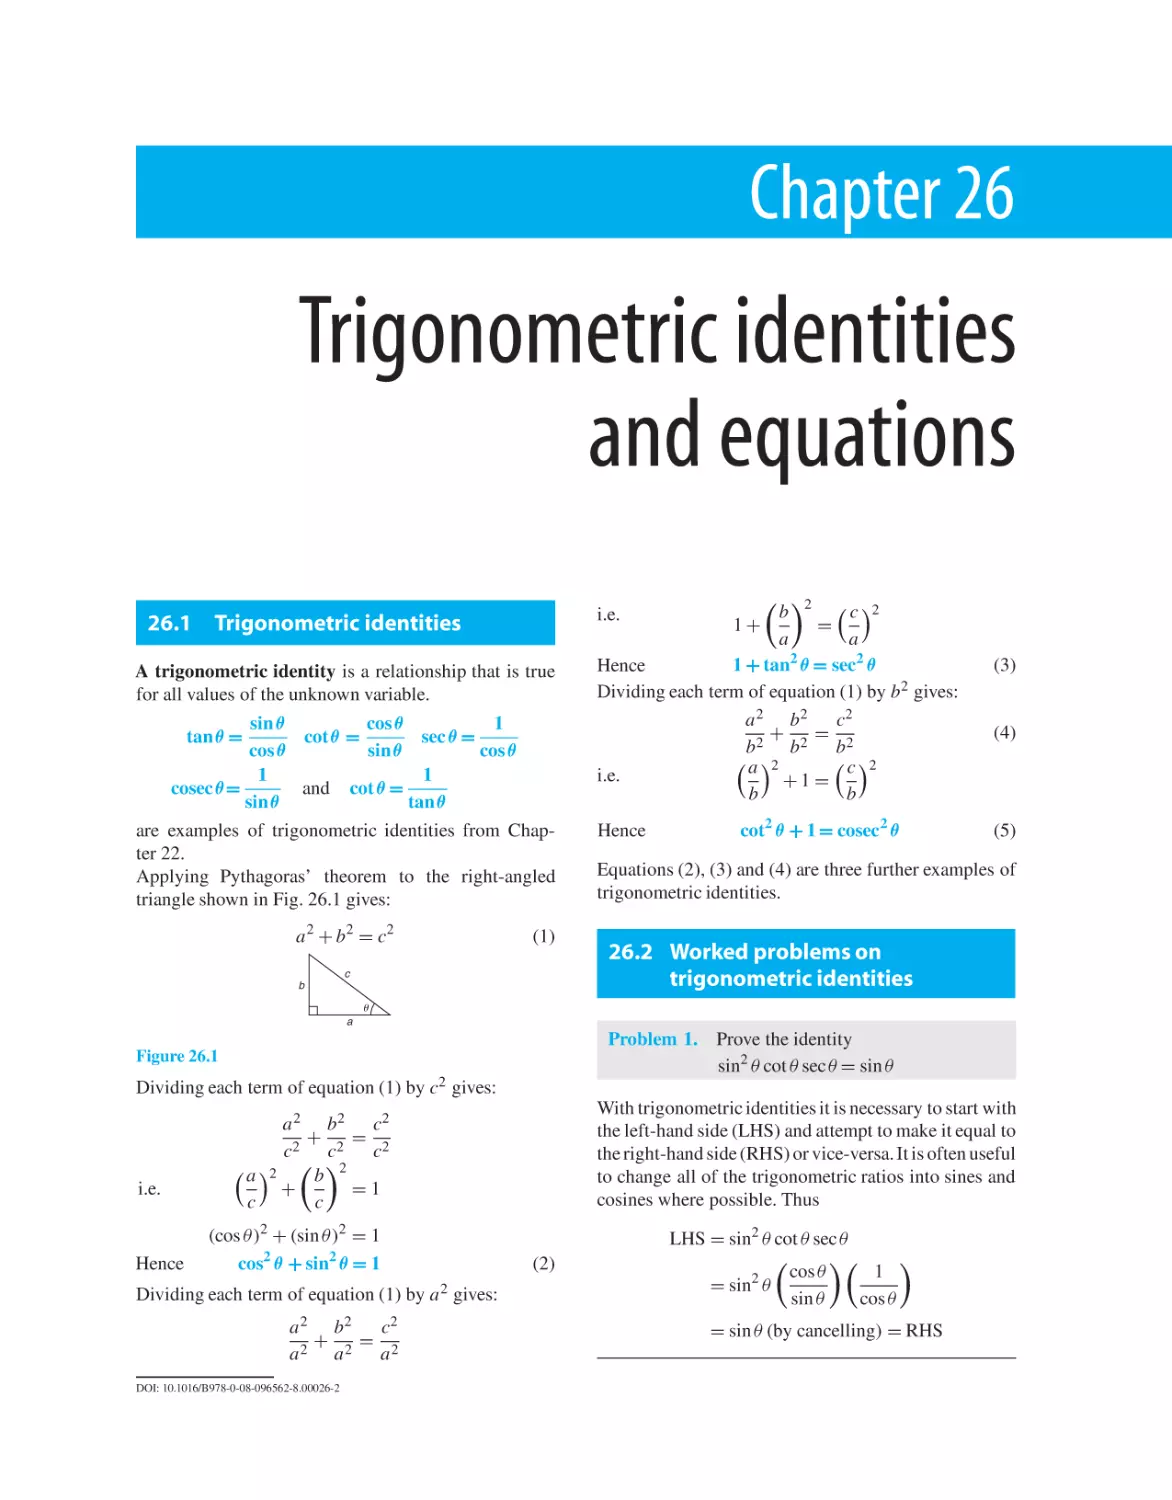 Chapter 26. Trigonometric identities and equations
26.1 Trigonometric identities
26.2 Worked problems on trigonometric identities